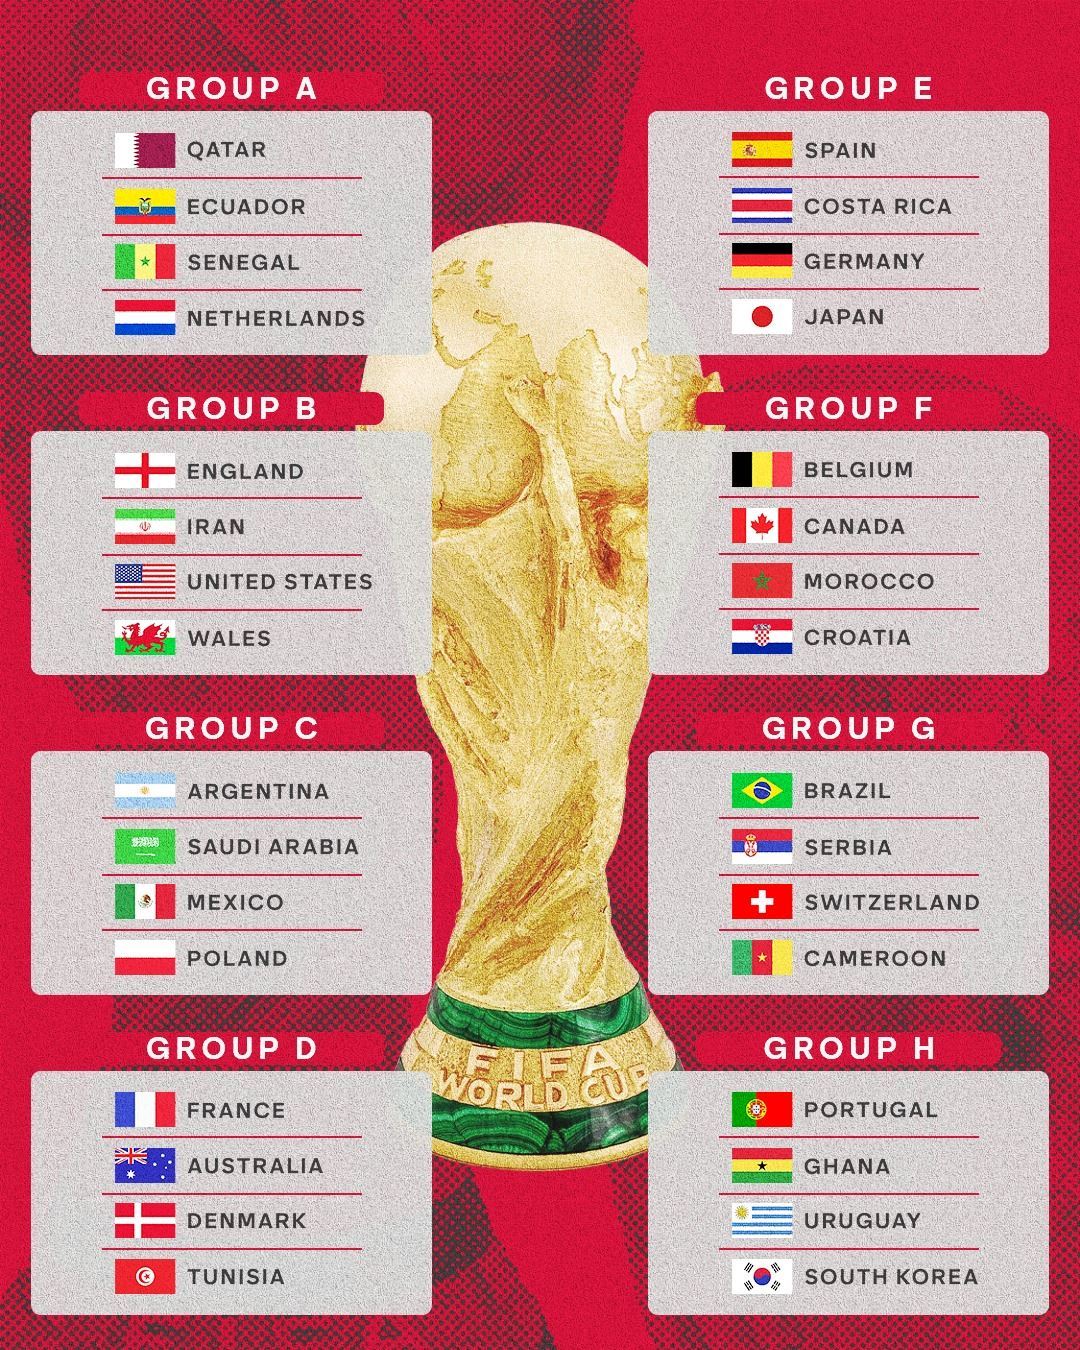 FIFA World Cup Qatar 2022 Groups are Finally Set